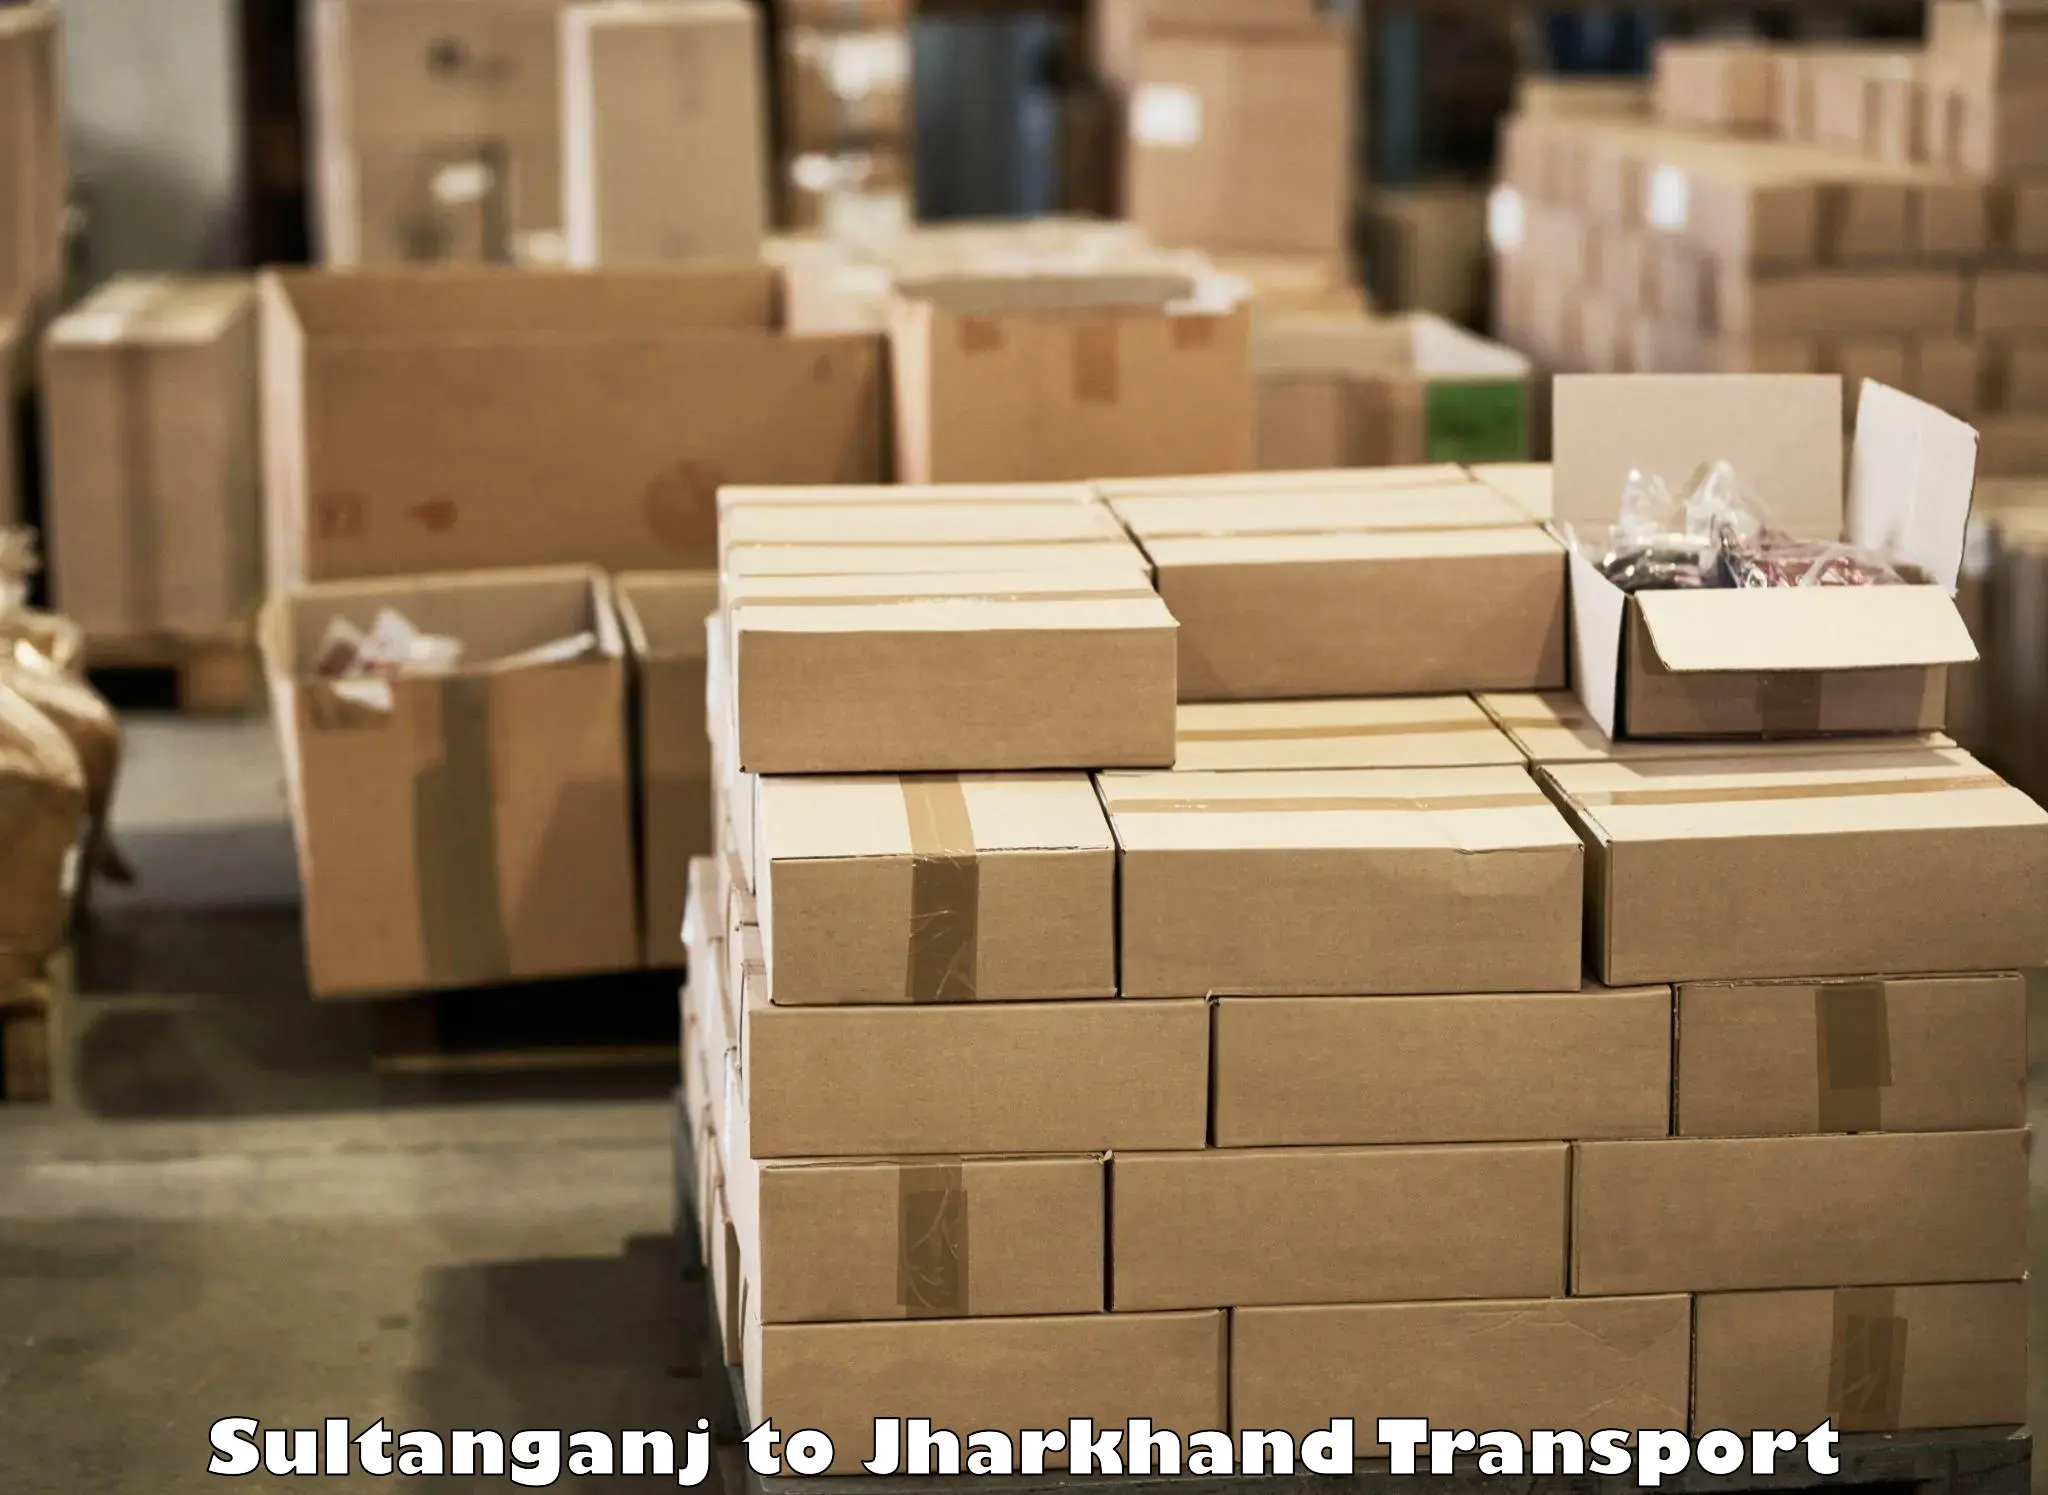 Best transport services in India Sultanganj to Seraikella